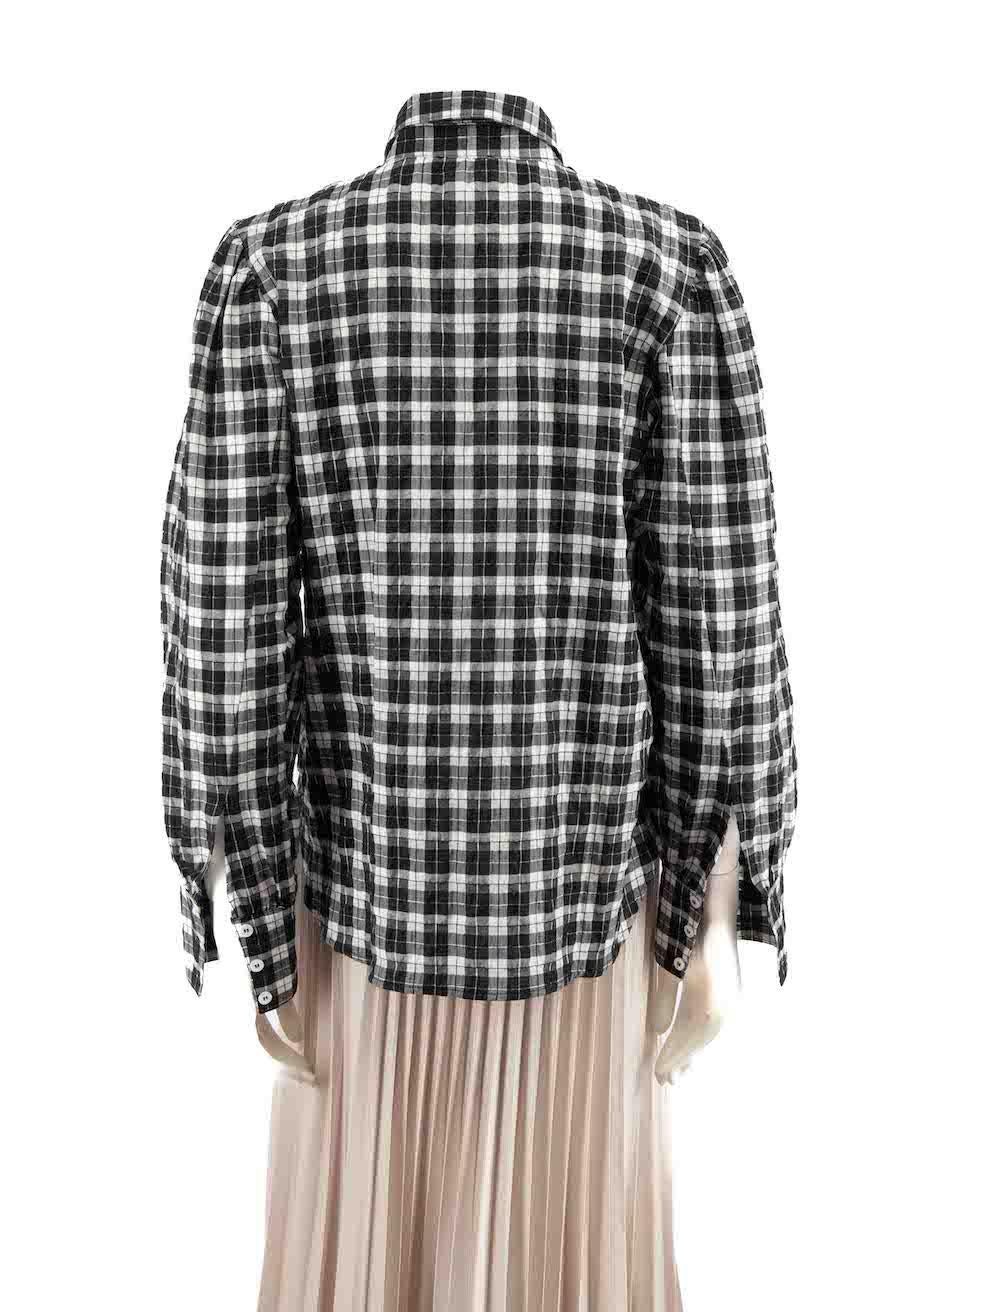 Ganni Black Ruffle Detail Checked Shirt Size L In Good Condition For Sale In London, GB